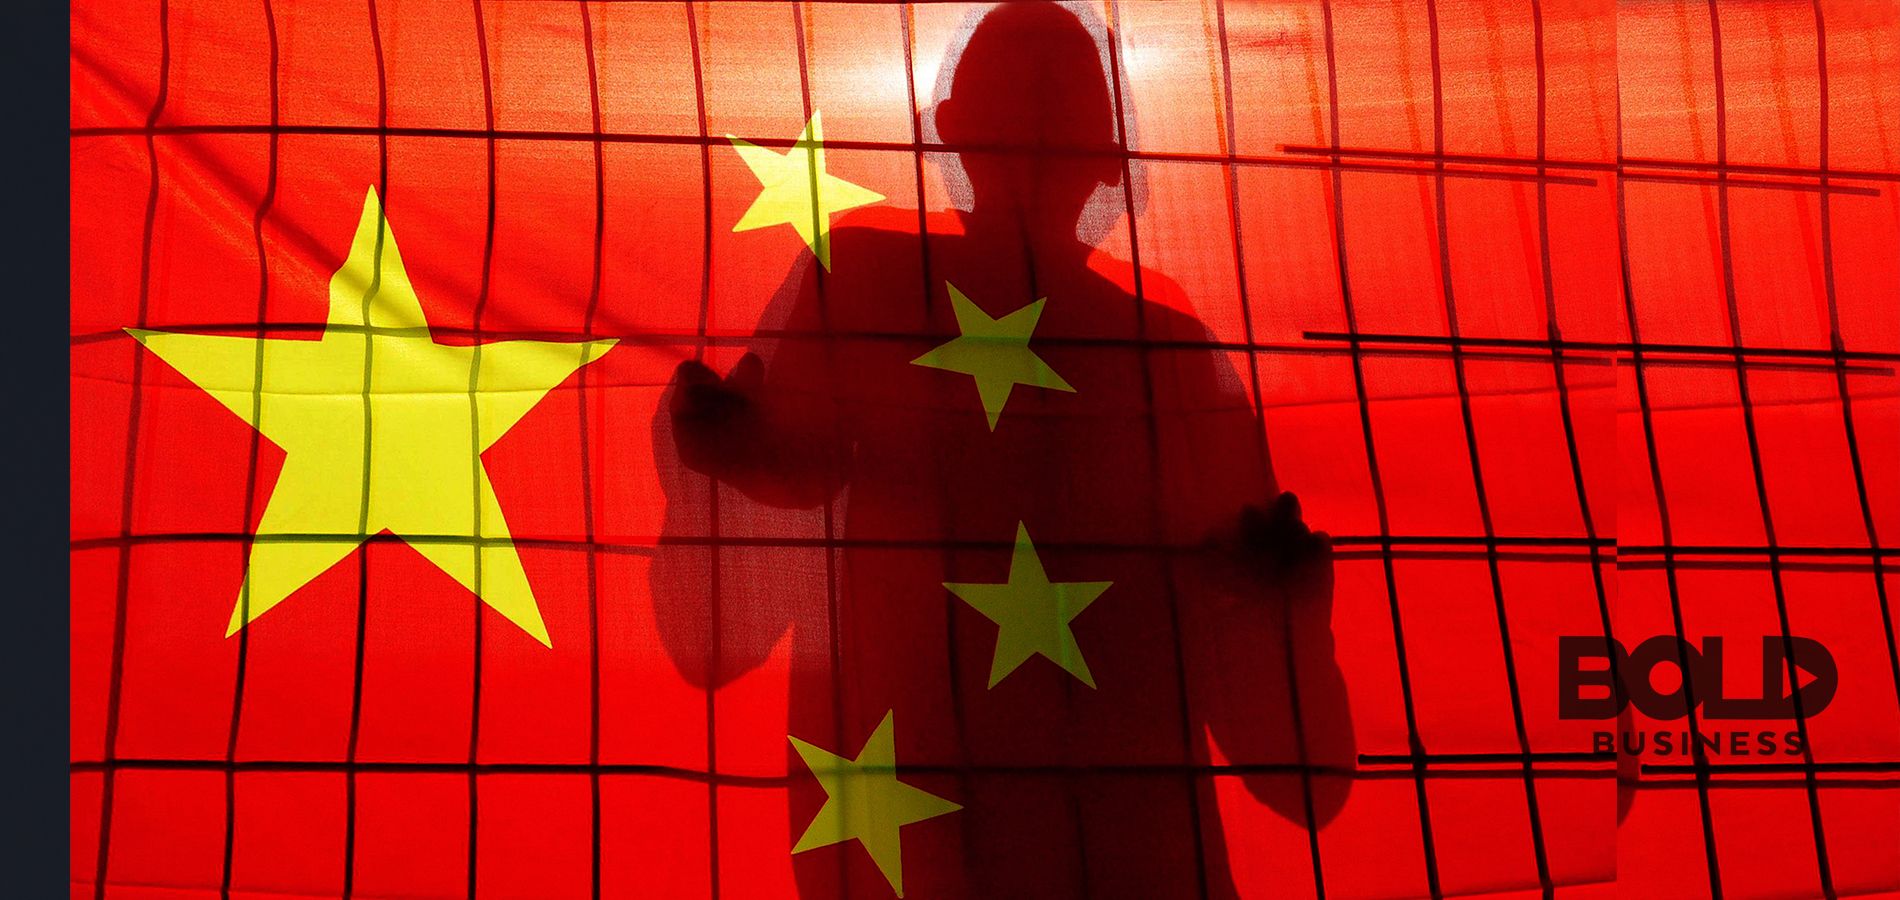 Someone standing behind a net and Chinese flag